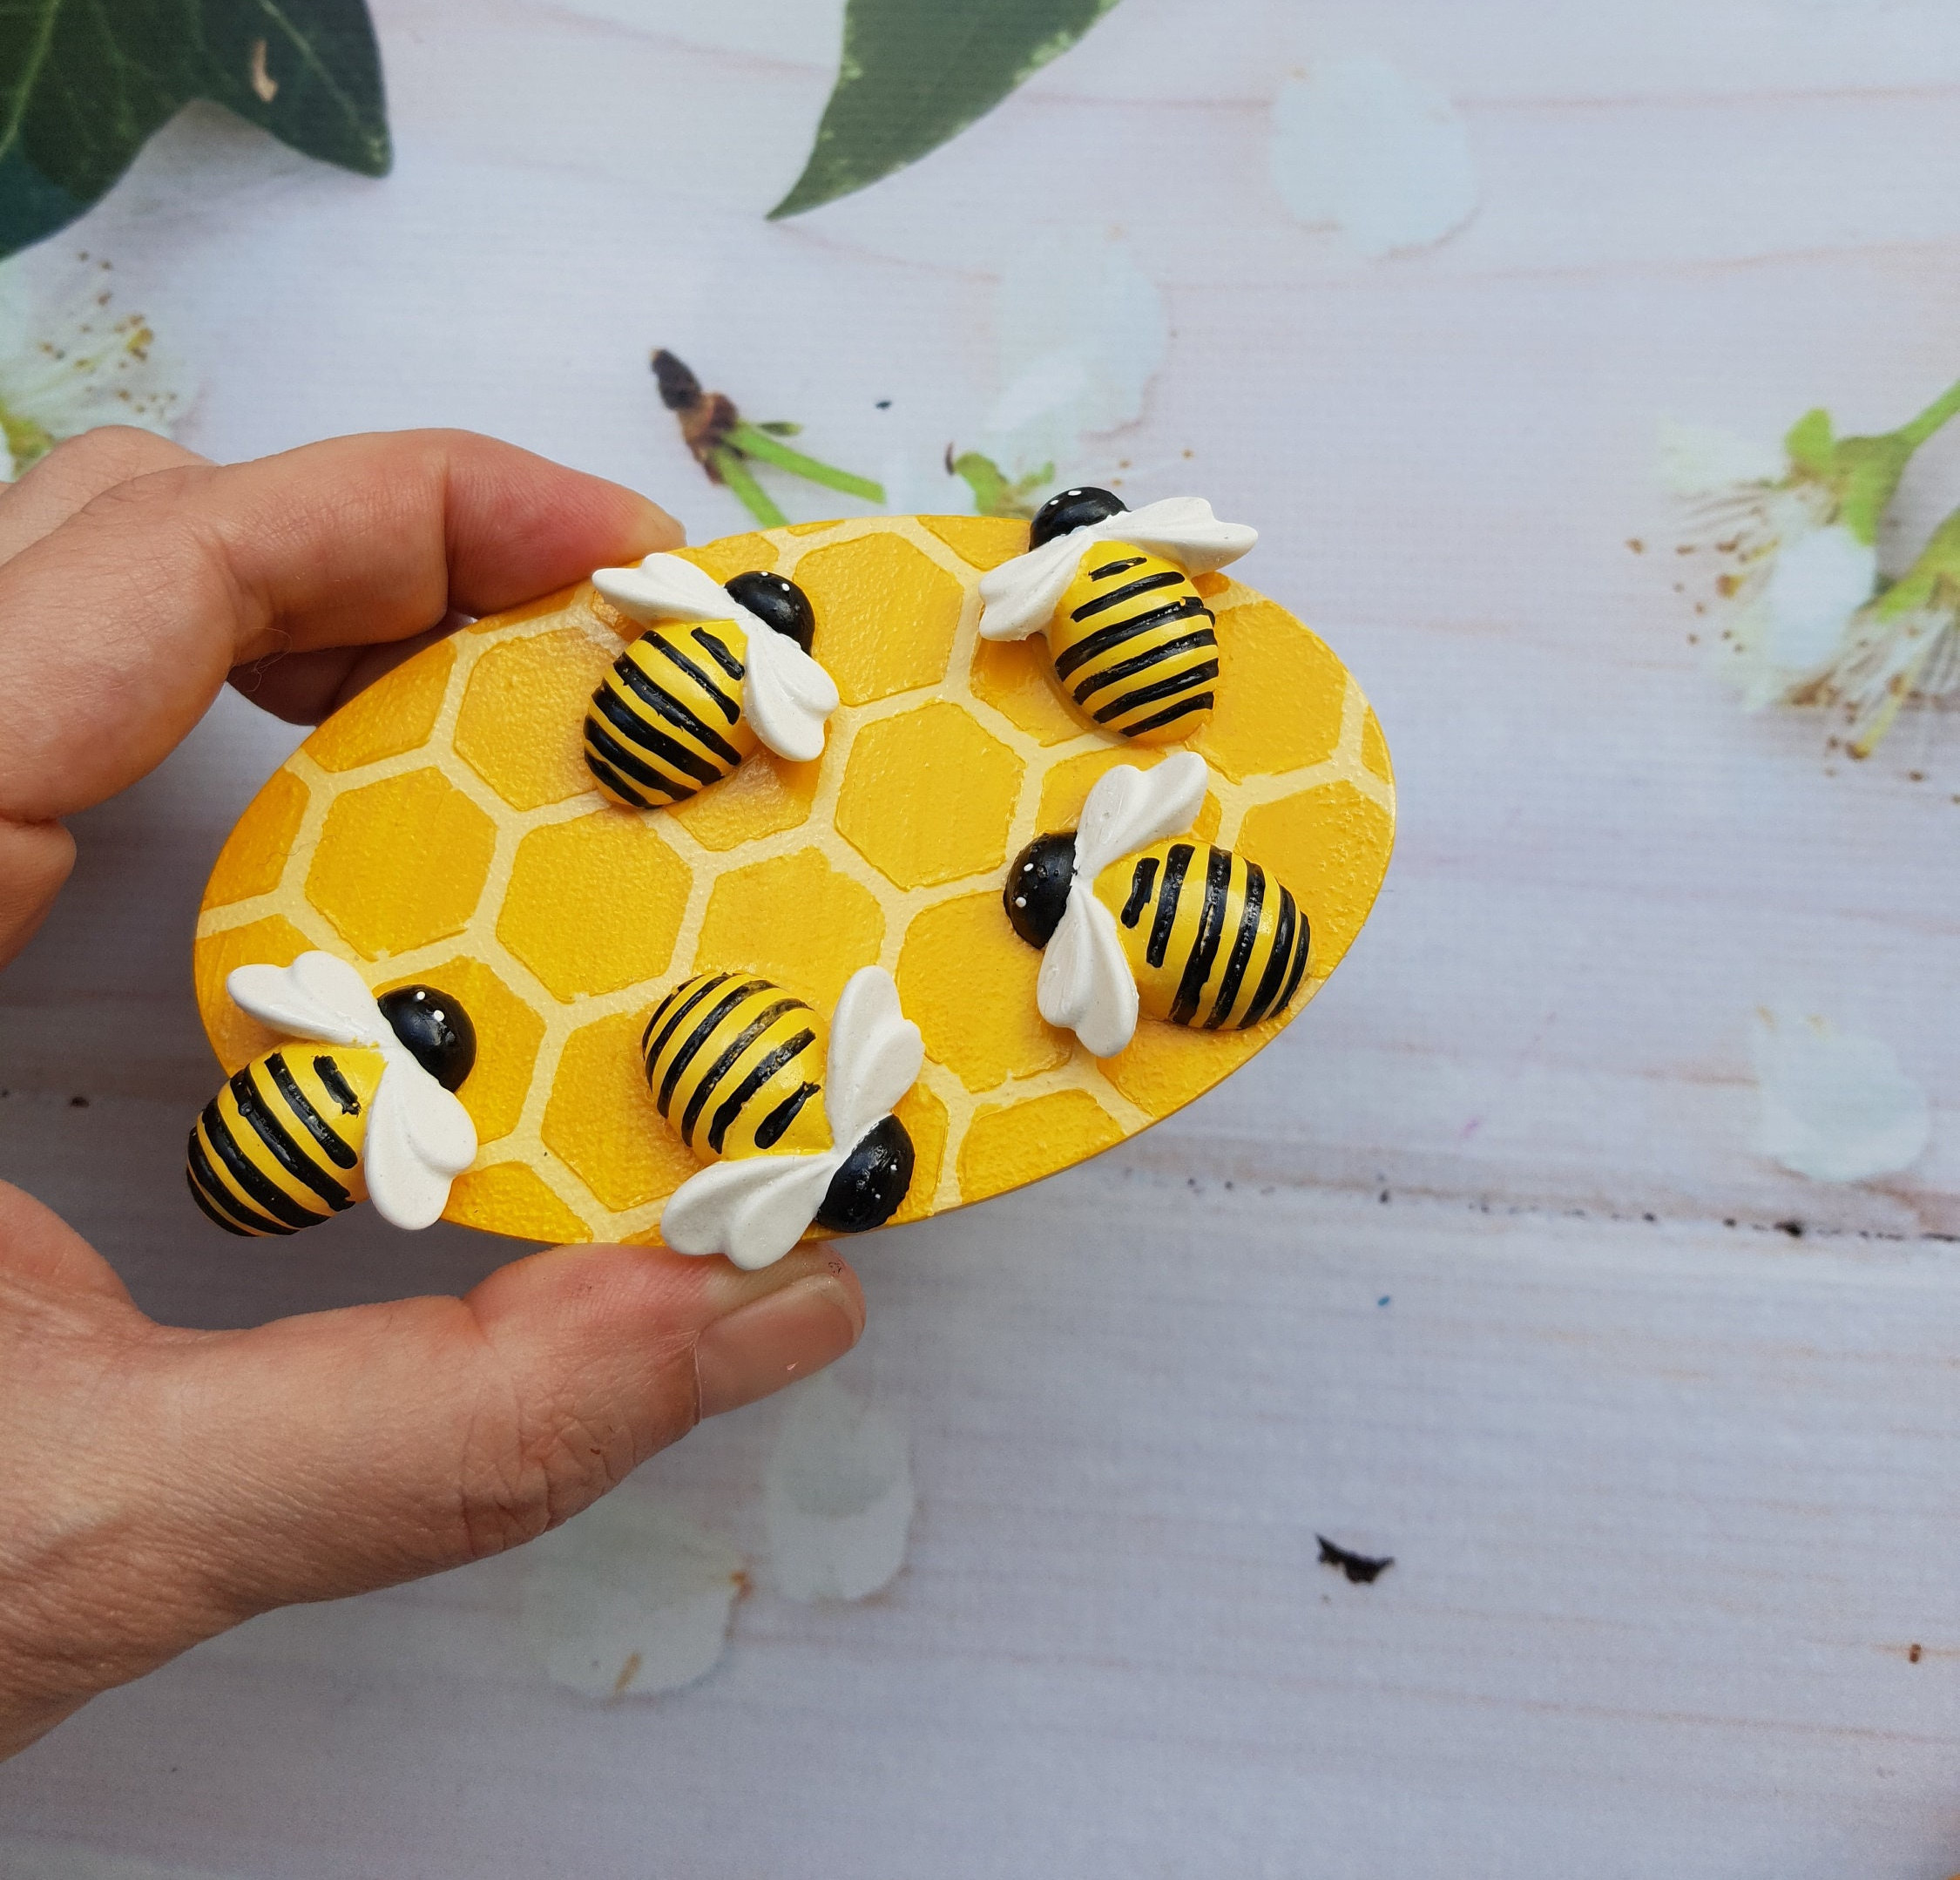 12Pcs Bumble Bees Refrigerator Magnets Crystal Glass Cute Honey Bee Magnet  Gifts for Baby Shower Theme Decorations Dry Erase Whiteboard Fridge Office